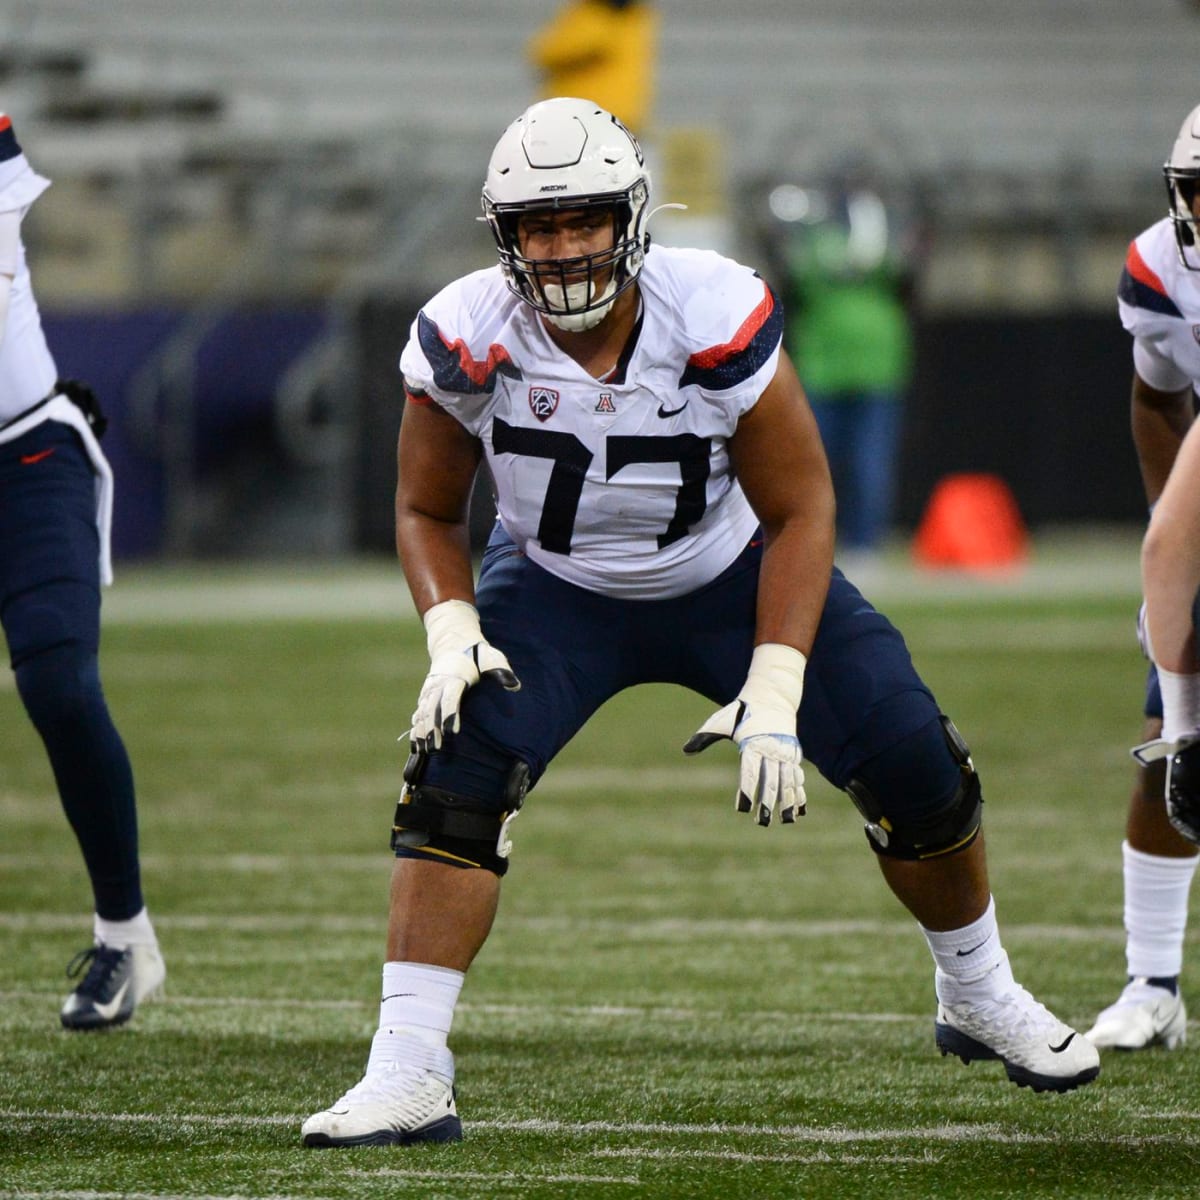 Hot Take Tuesday: Arizona Wildcats Have a Top 20 Player in the 2023 NFL Draft - Visit NFL Draft on Sports Illustrated, the latest news coverage, with rankings for NFL Draft prospects,